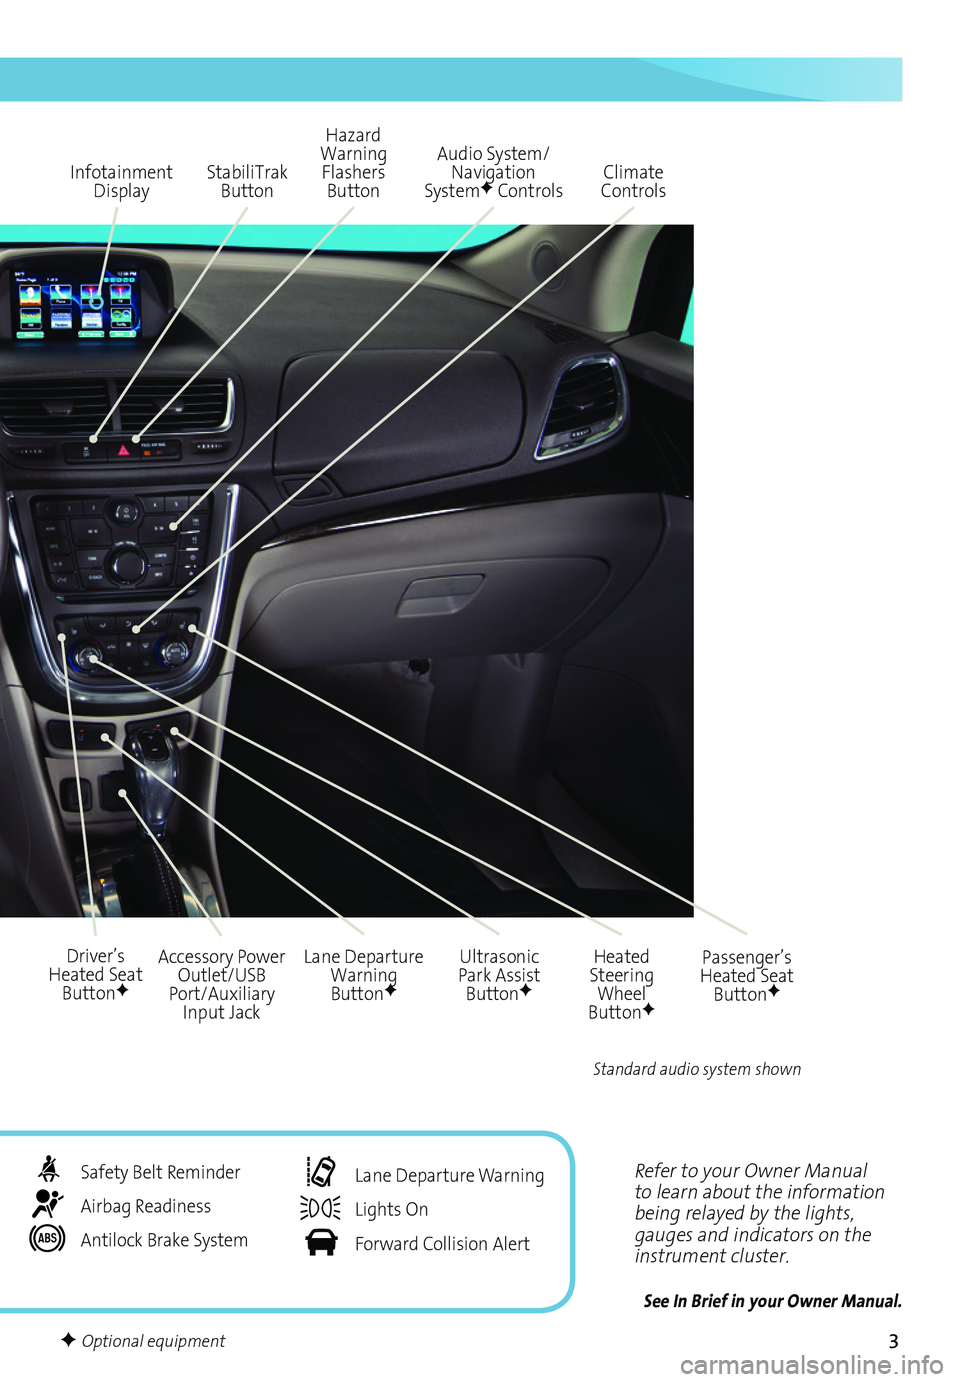 BUICK ENCORE 2016  Get To Know Guide 3
Refer to your Owner Manual to learn about the information being relayed by the lights, gauges and indicators on the instrument cluster.
See In Brief in your Owner Manual.
Infotainment Display
Ultras